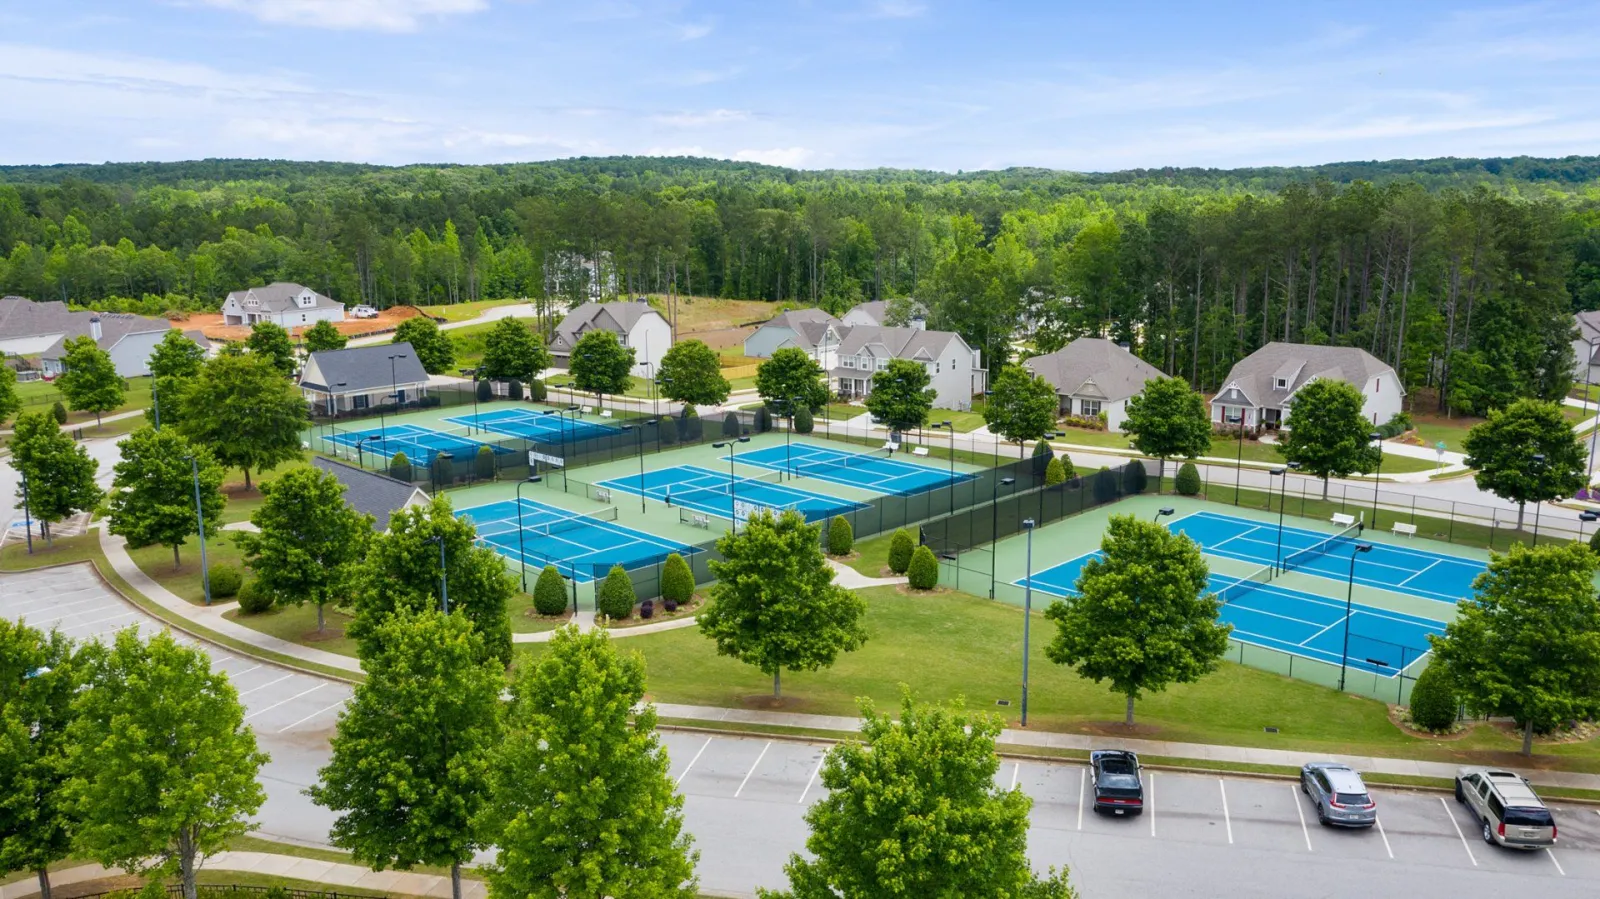 an overhead view of the many tennis courts at The Georgian